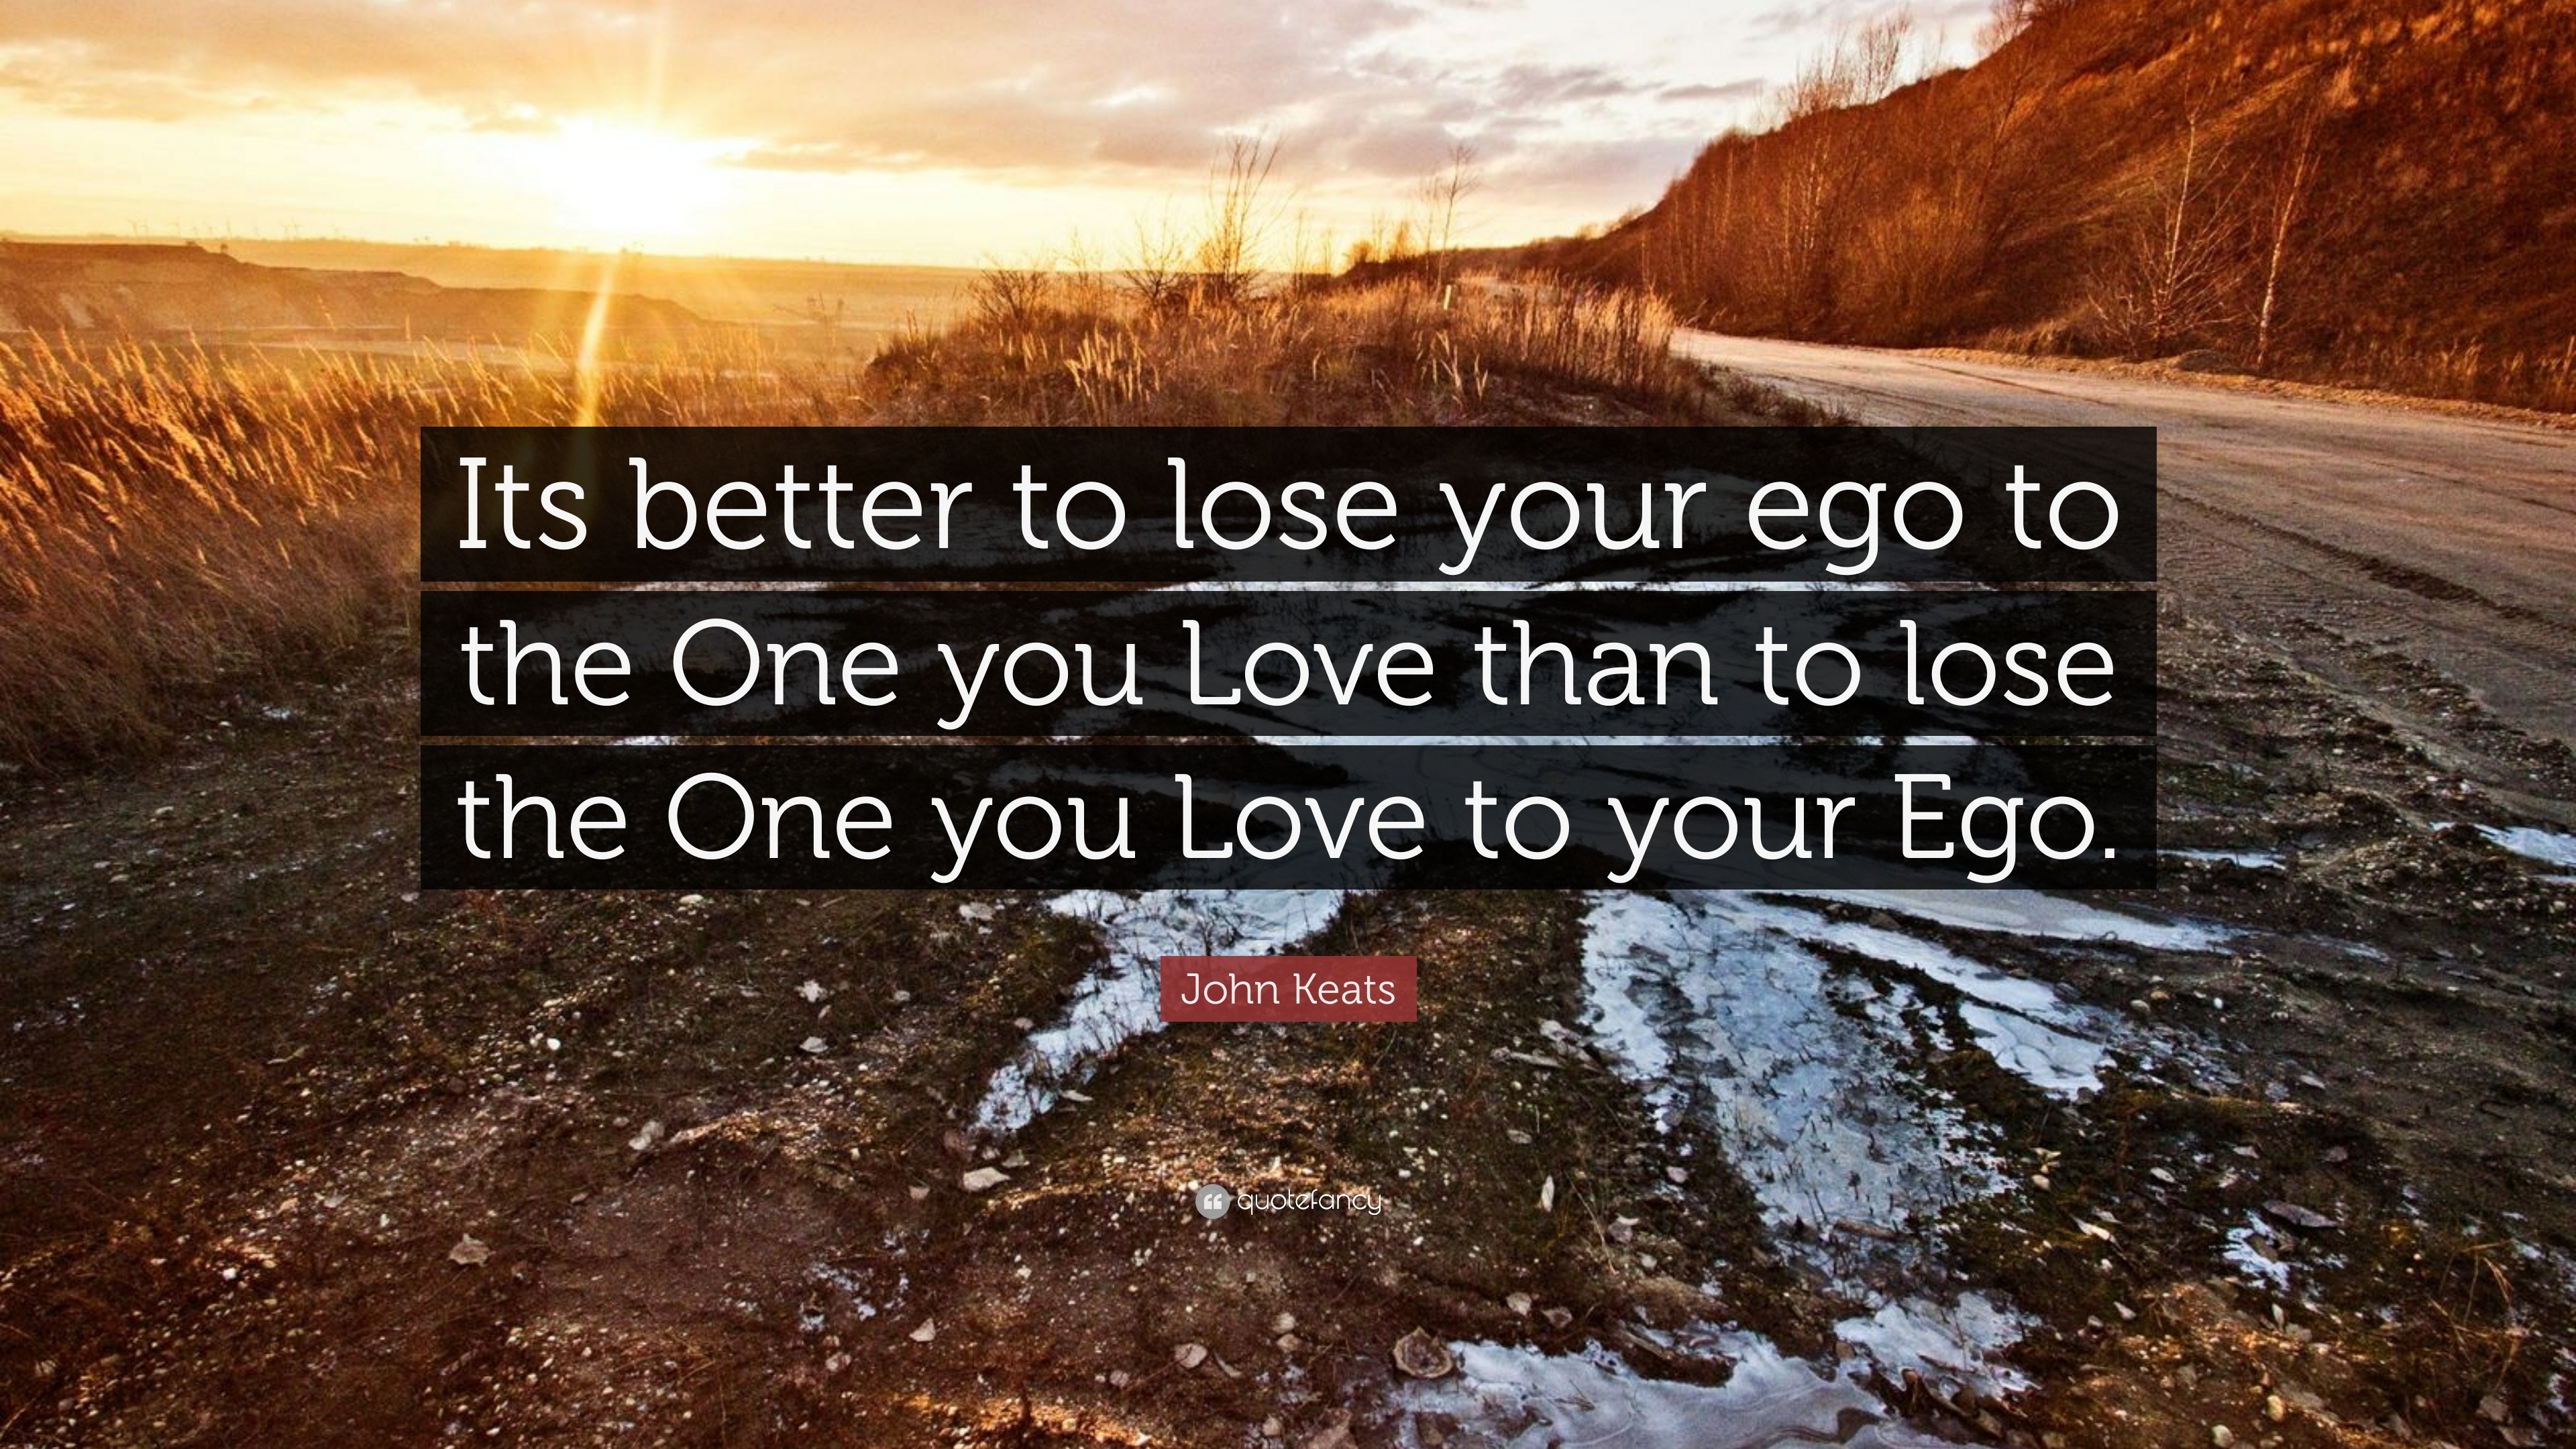 John Keats Quote “Its better to lose your ego to the e you Love